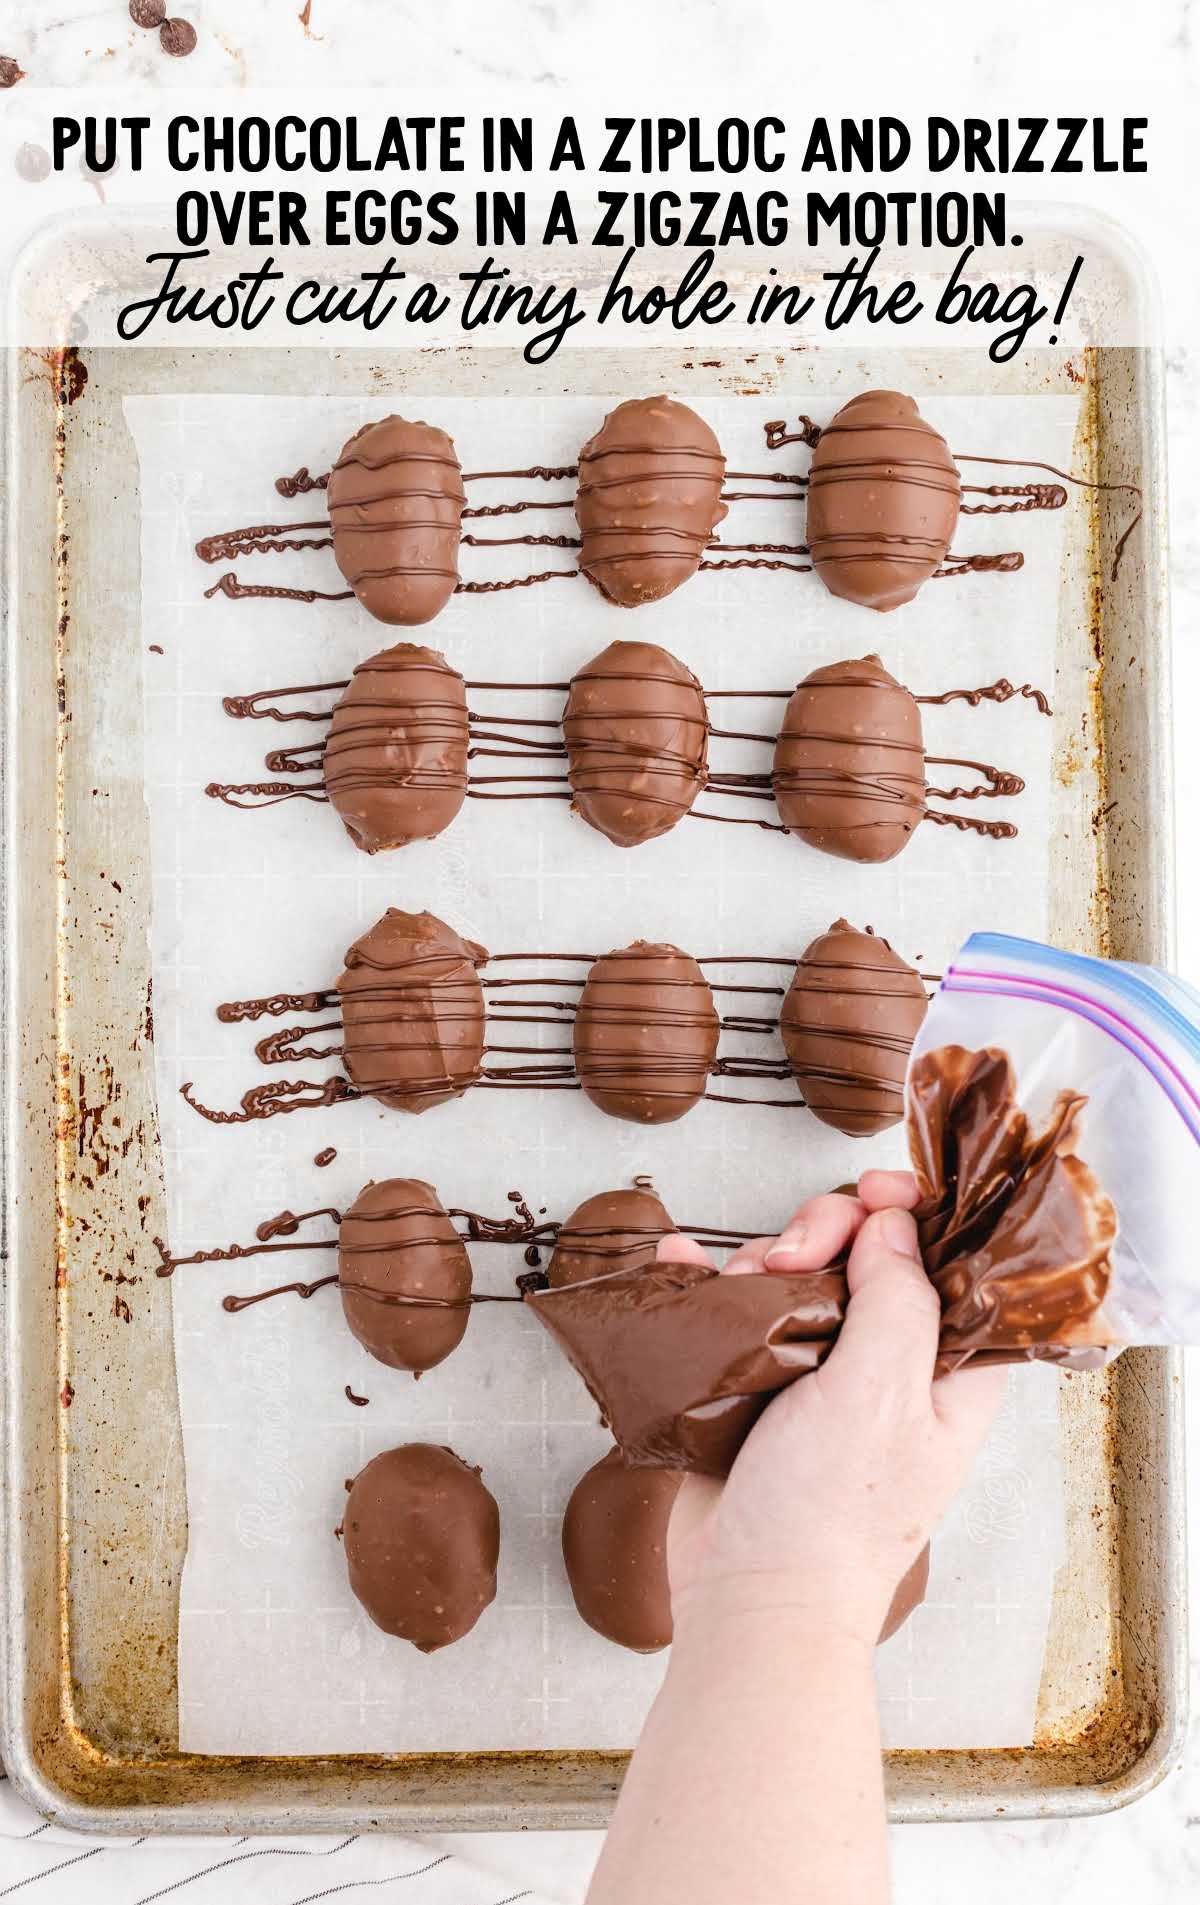 melted chocolate being drizzled onto the edible chocolate eggs